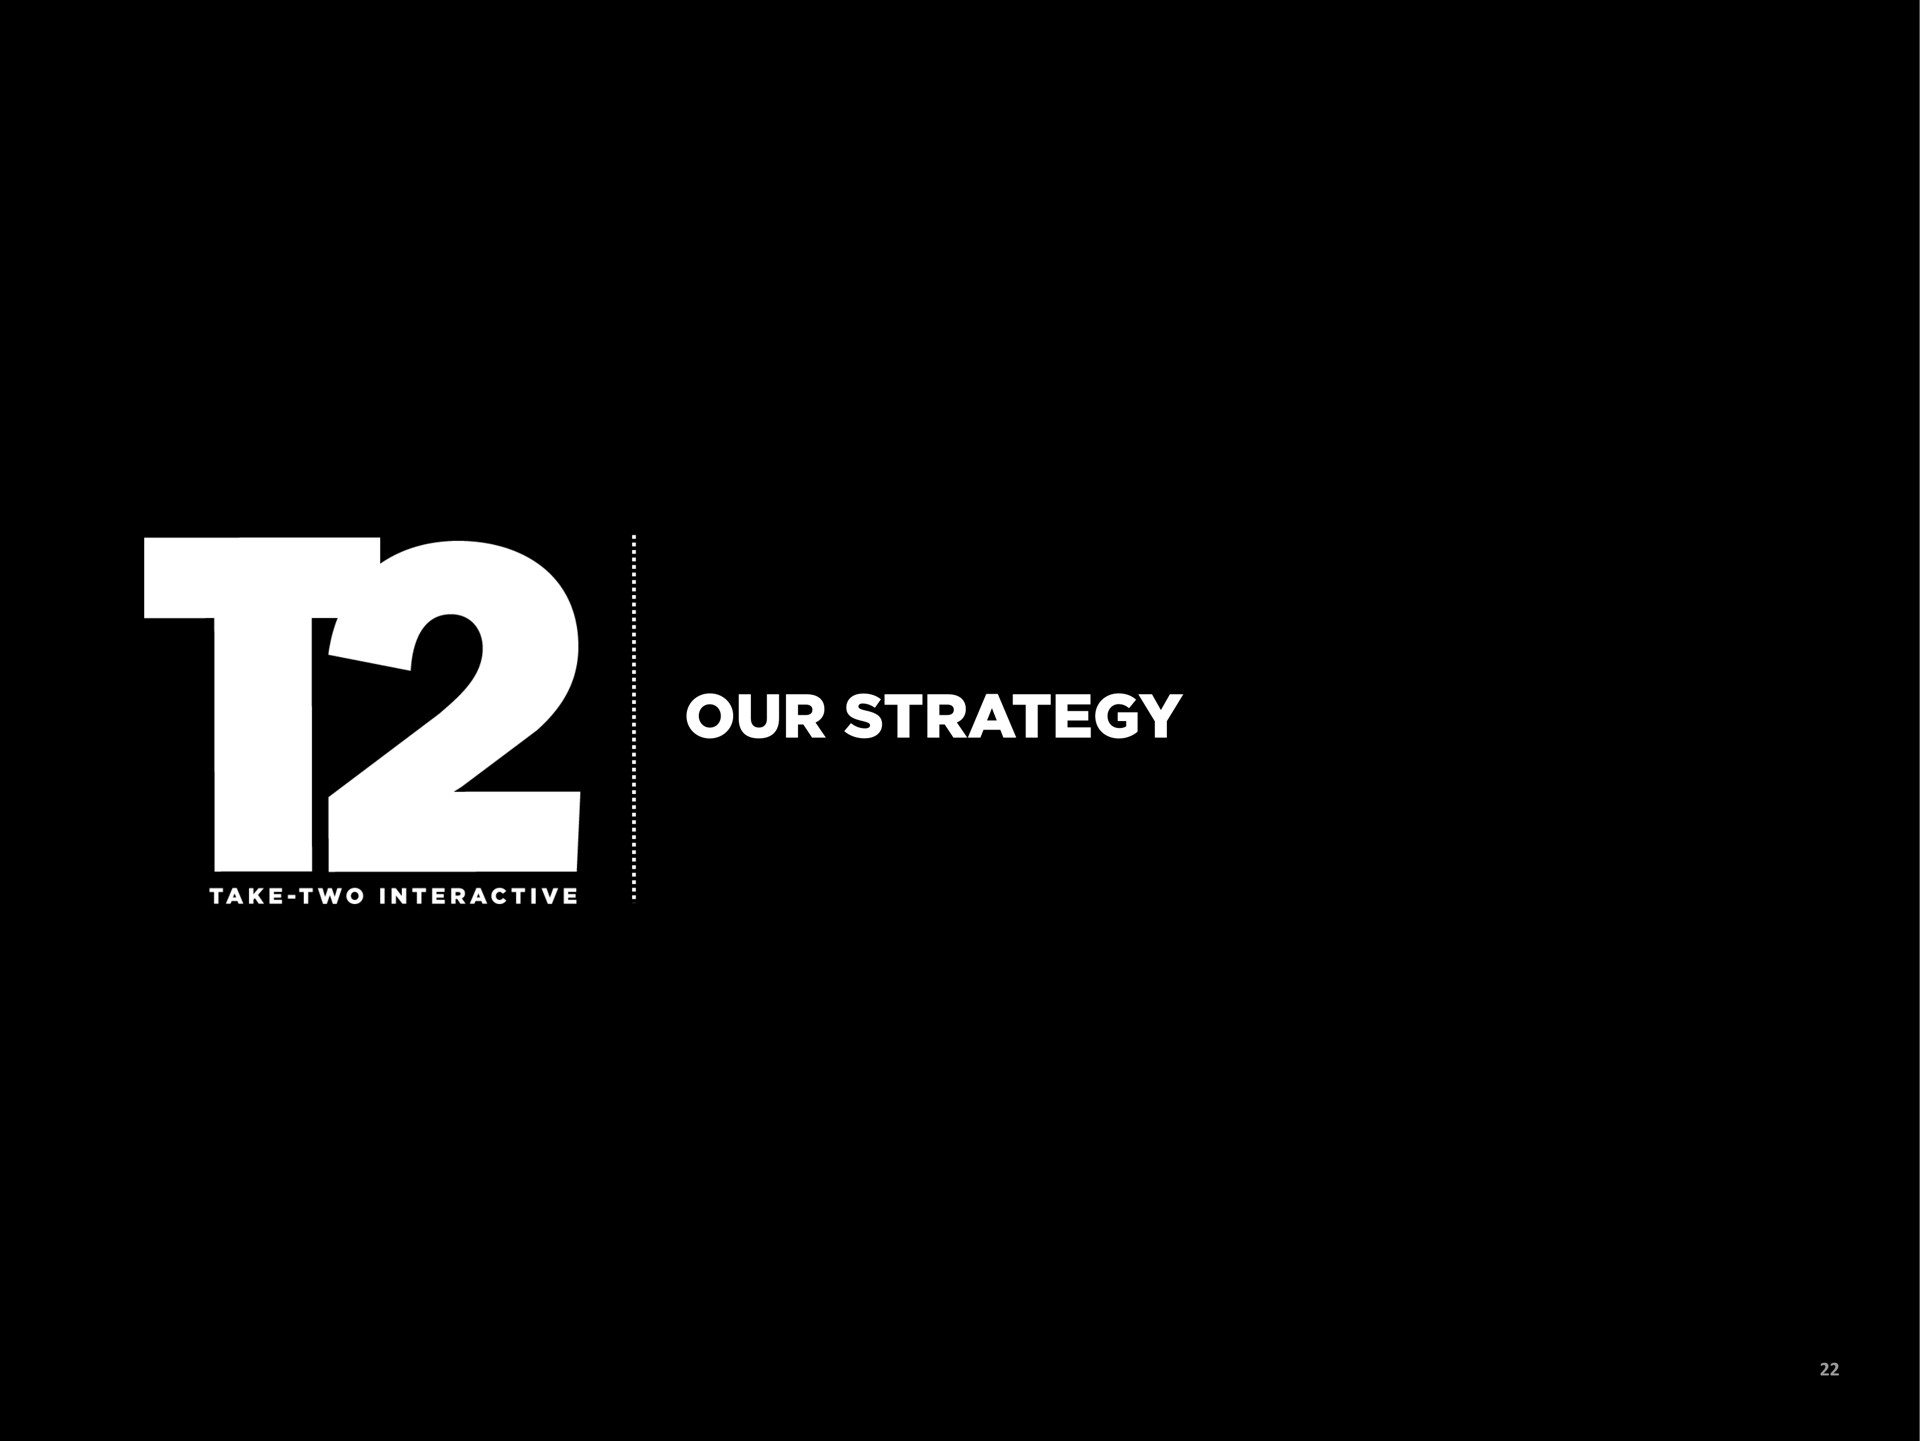 our strategy | Take-Two Interactive